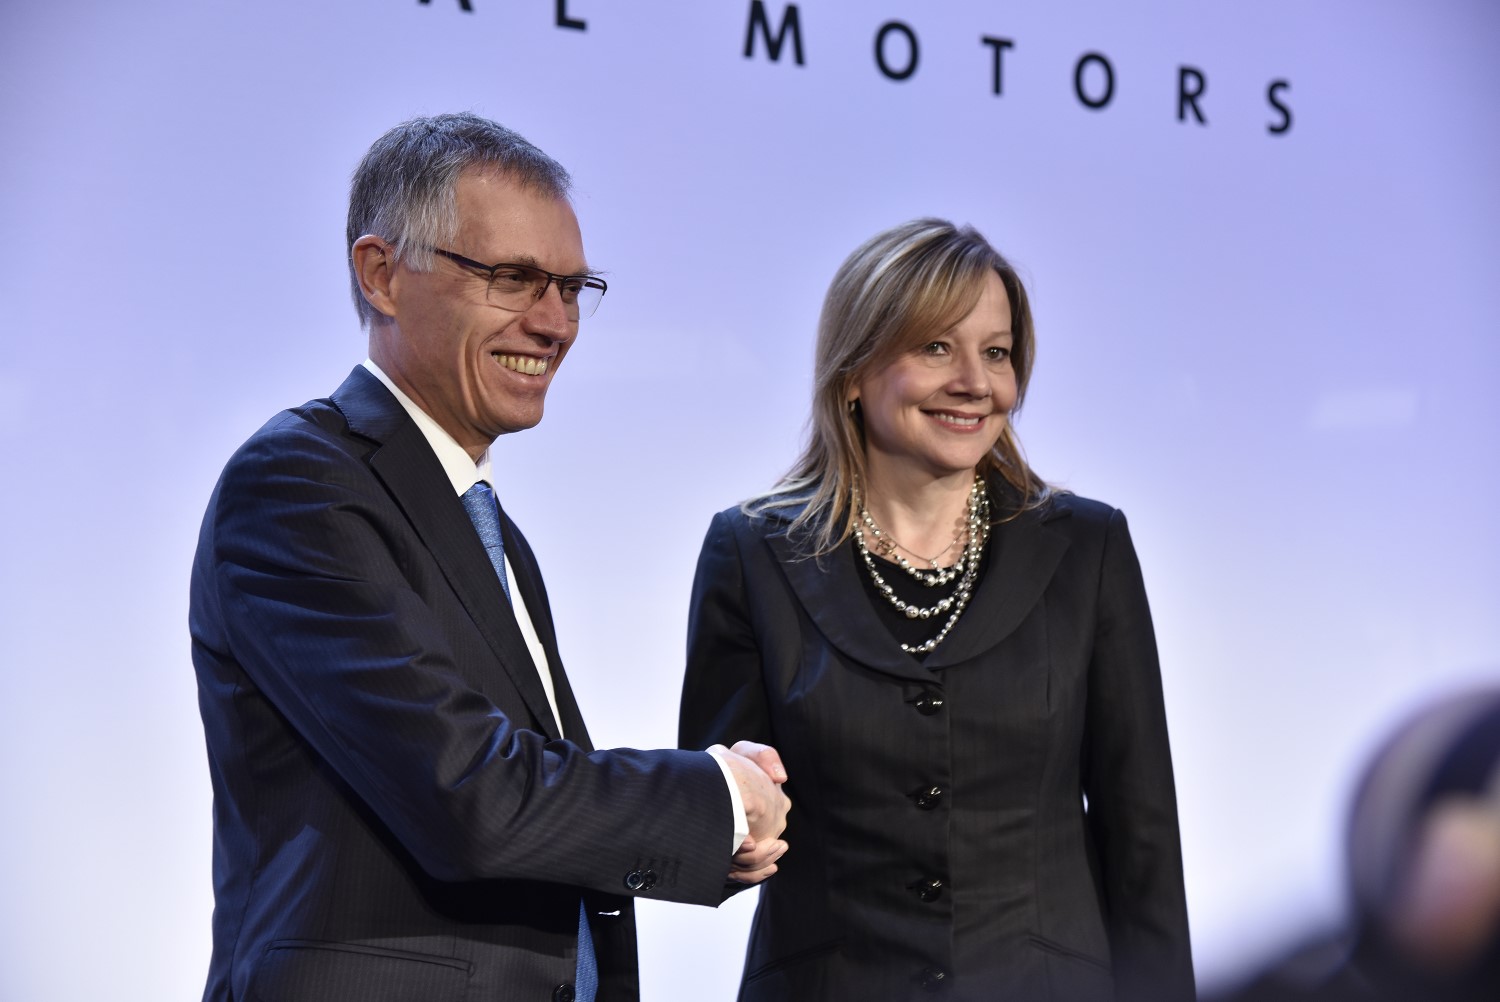 (Left to Right) Carlos Tavares, chairman of the Managing Board of PSA, and Mary T. Barra, GM chairman and chief executive officer, at this morning’s press conference in Paris announcing the agreement under which GM’s Opel/Vauxhall subsidiary and GM Financial’s European operations will join the PSA Group